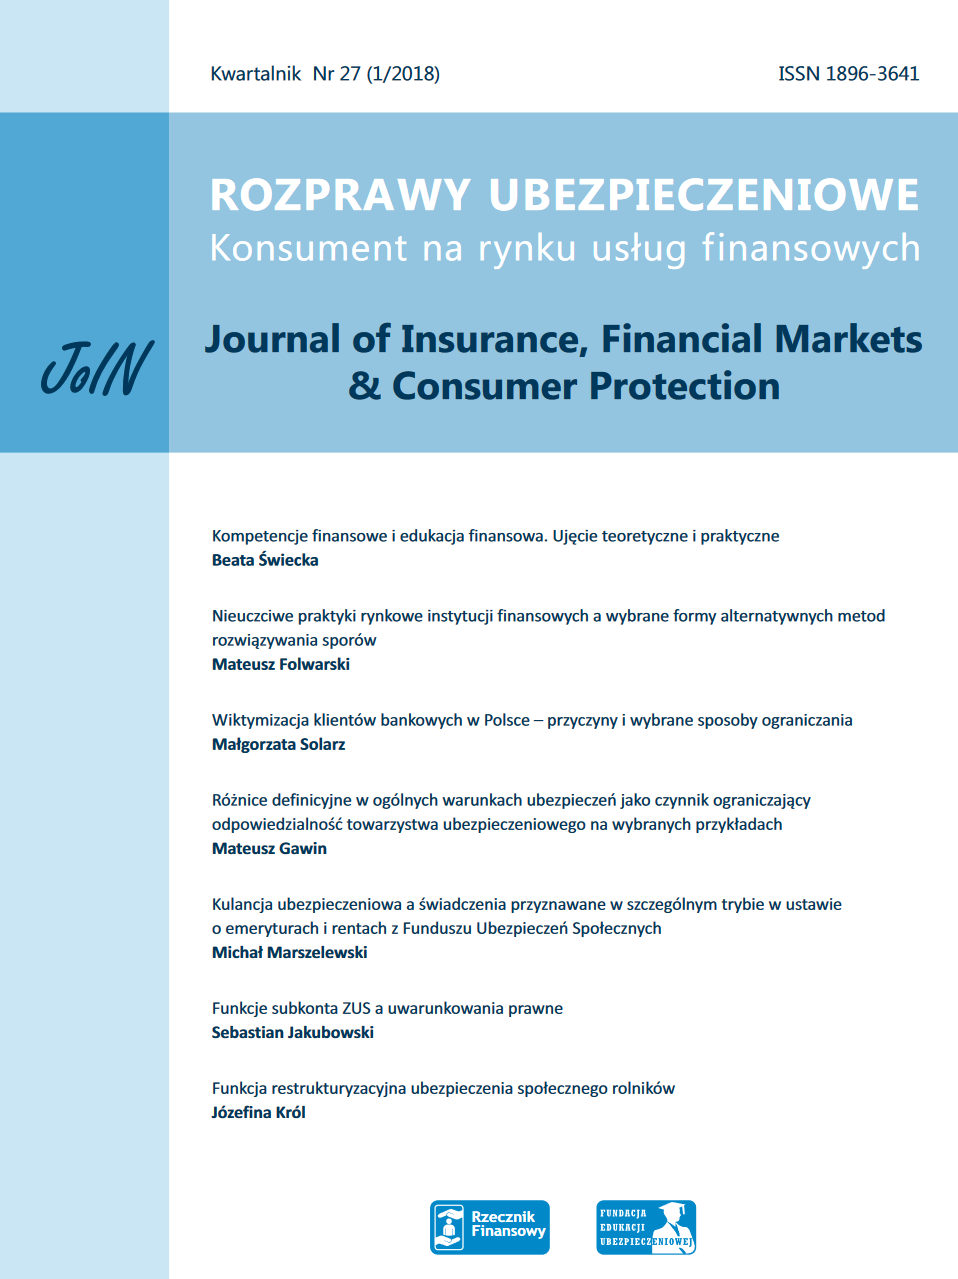 Functions of subaccount in Social Insurance Institution – legal perspective Cover Image